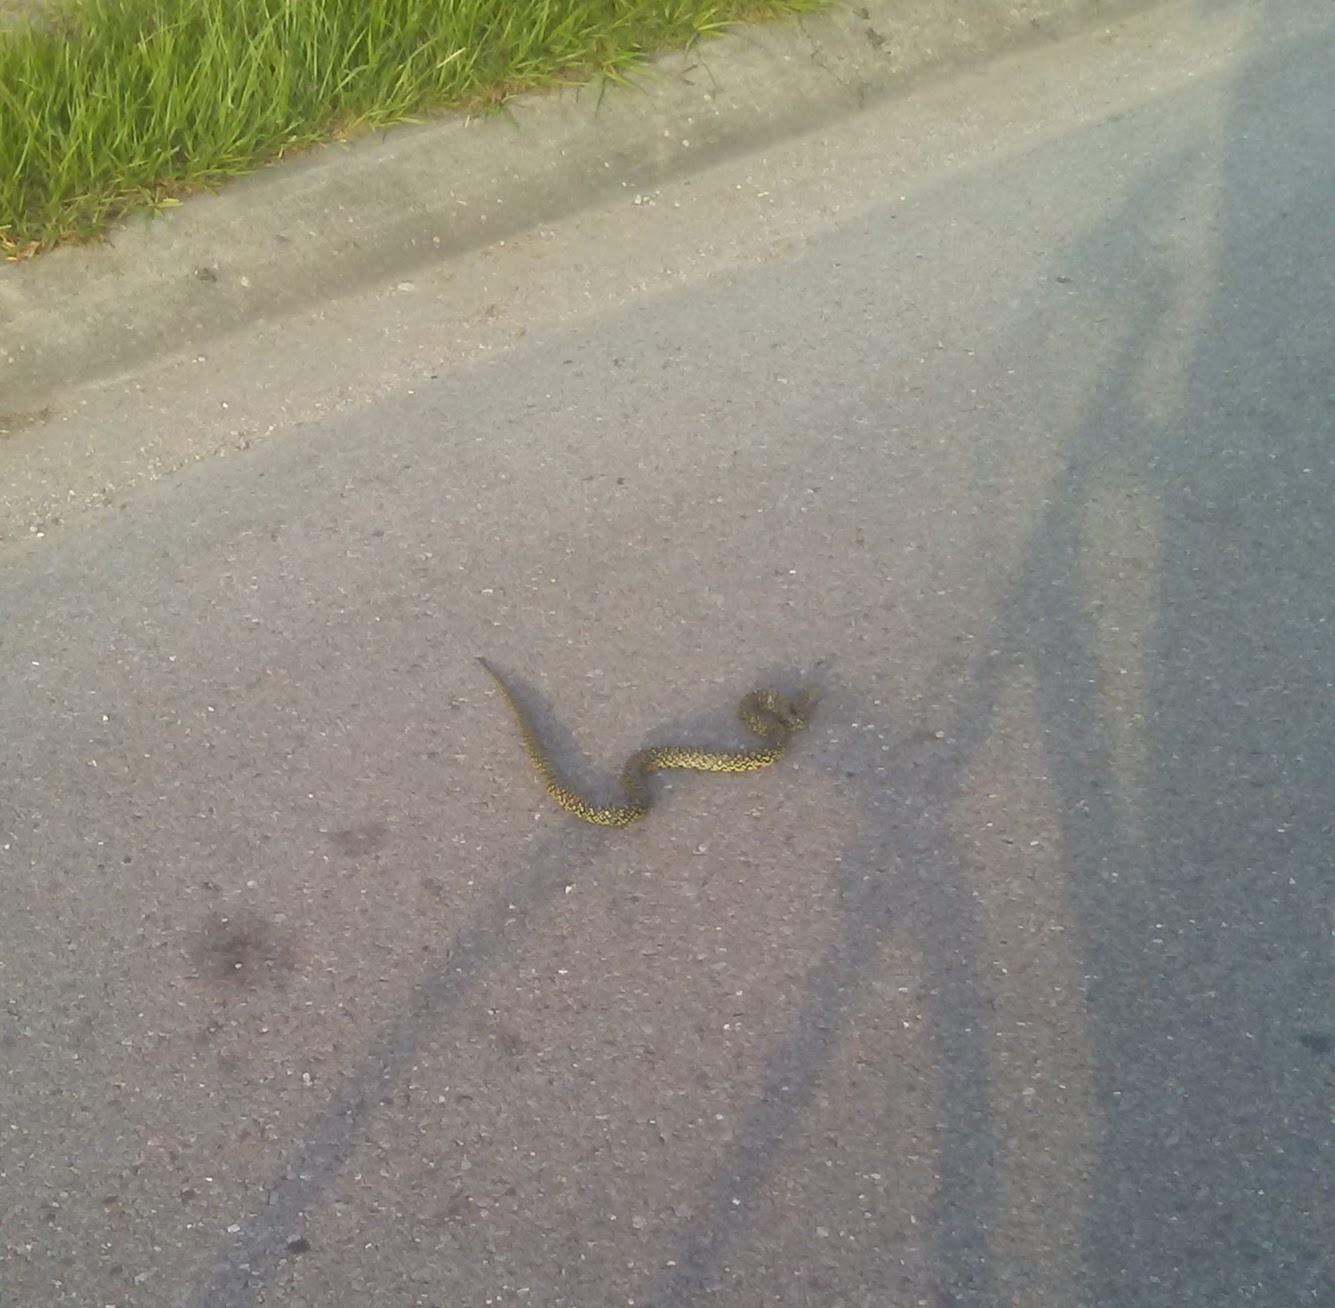 speckled king snake in the road